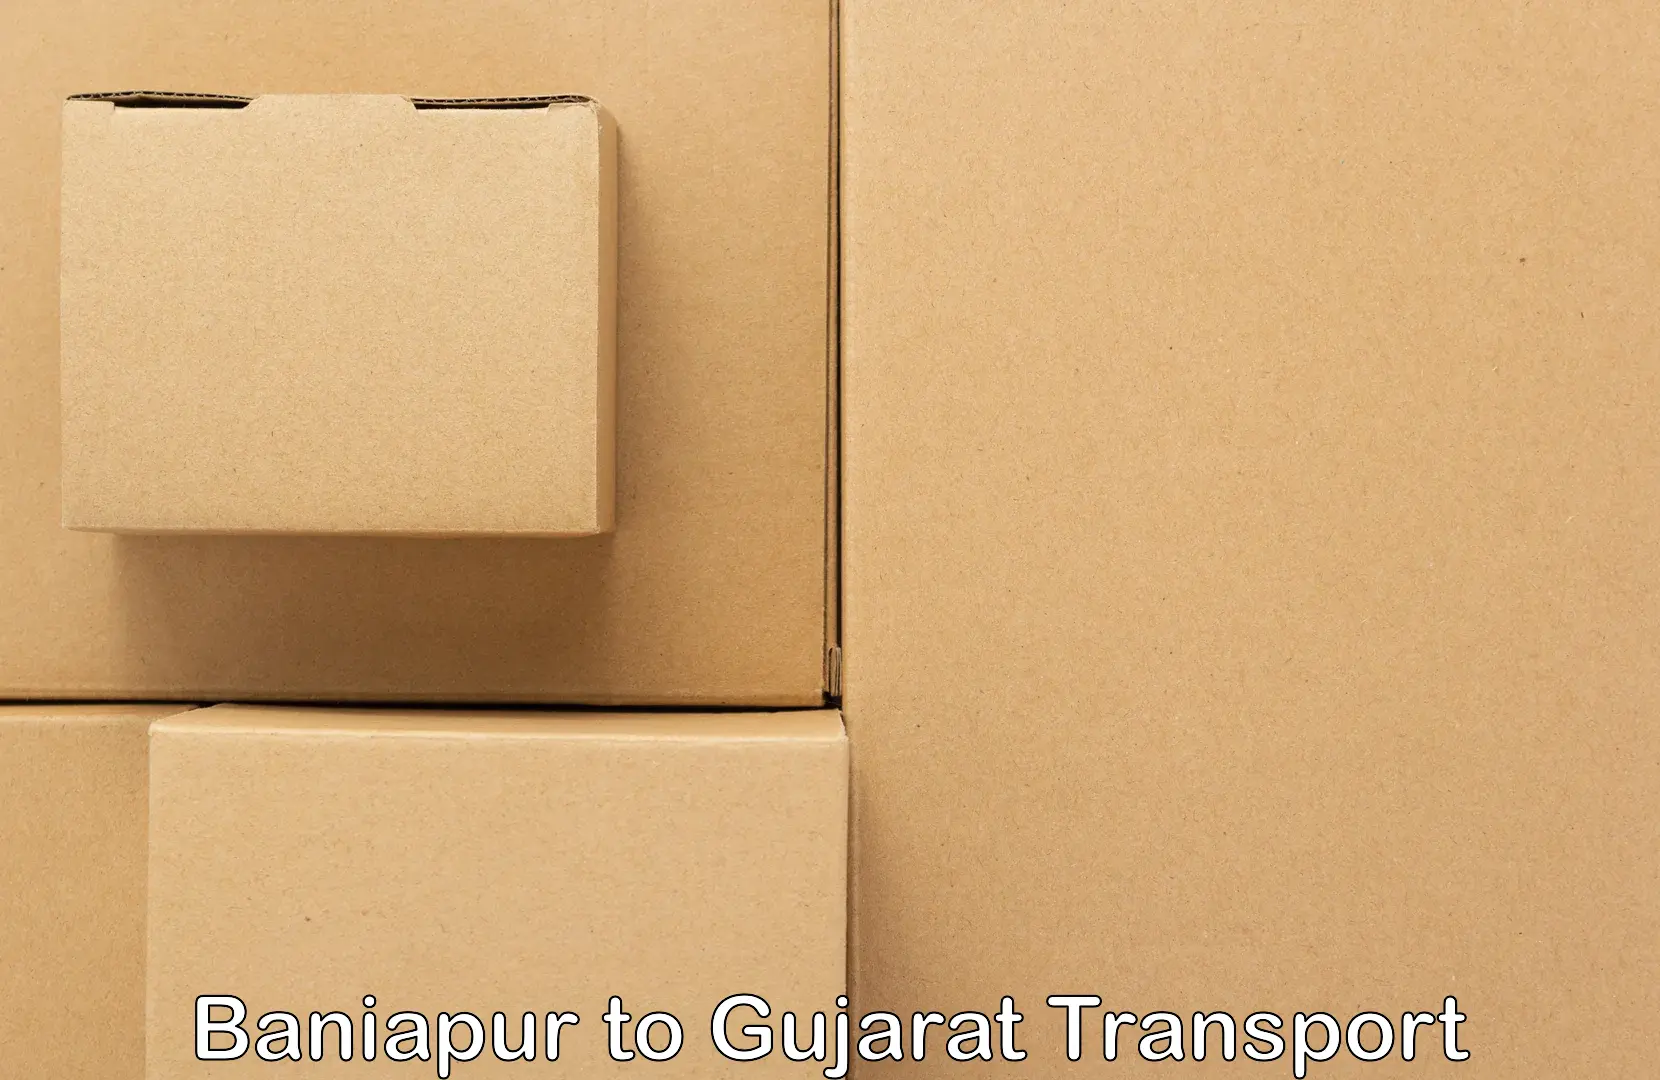 Air freight transport services Baniapur to IIIT Surat